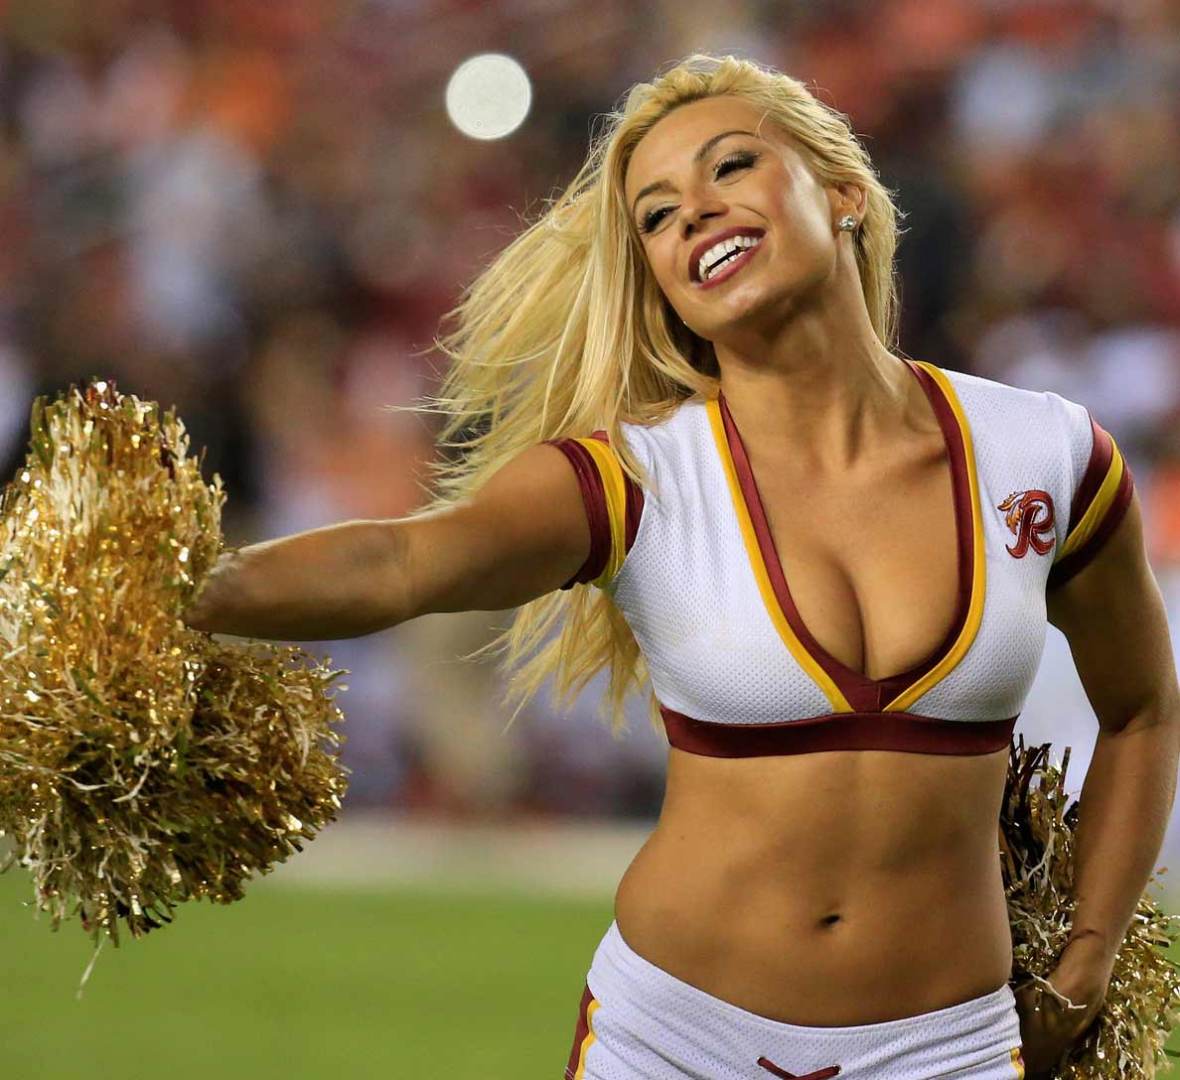 donna eicher recommends hot naked nfl cheerleaders pic